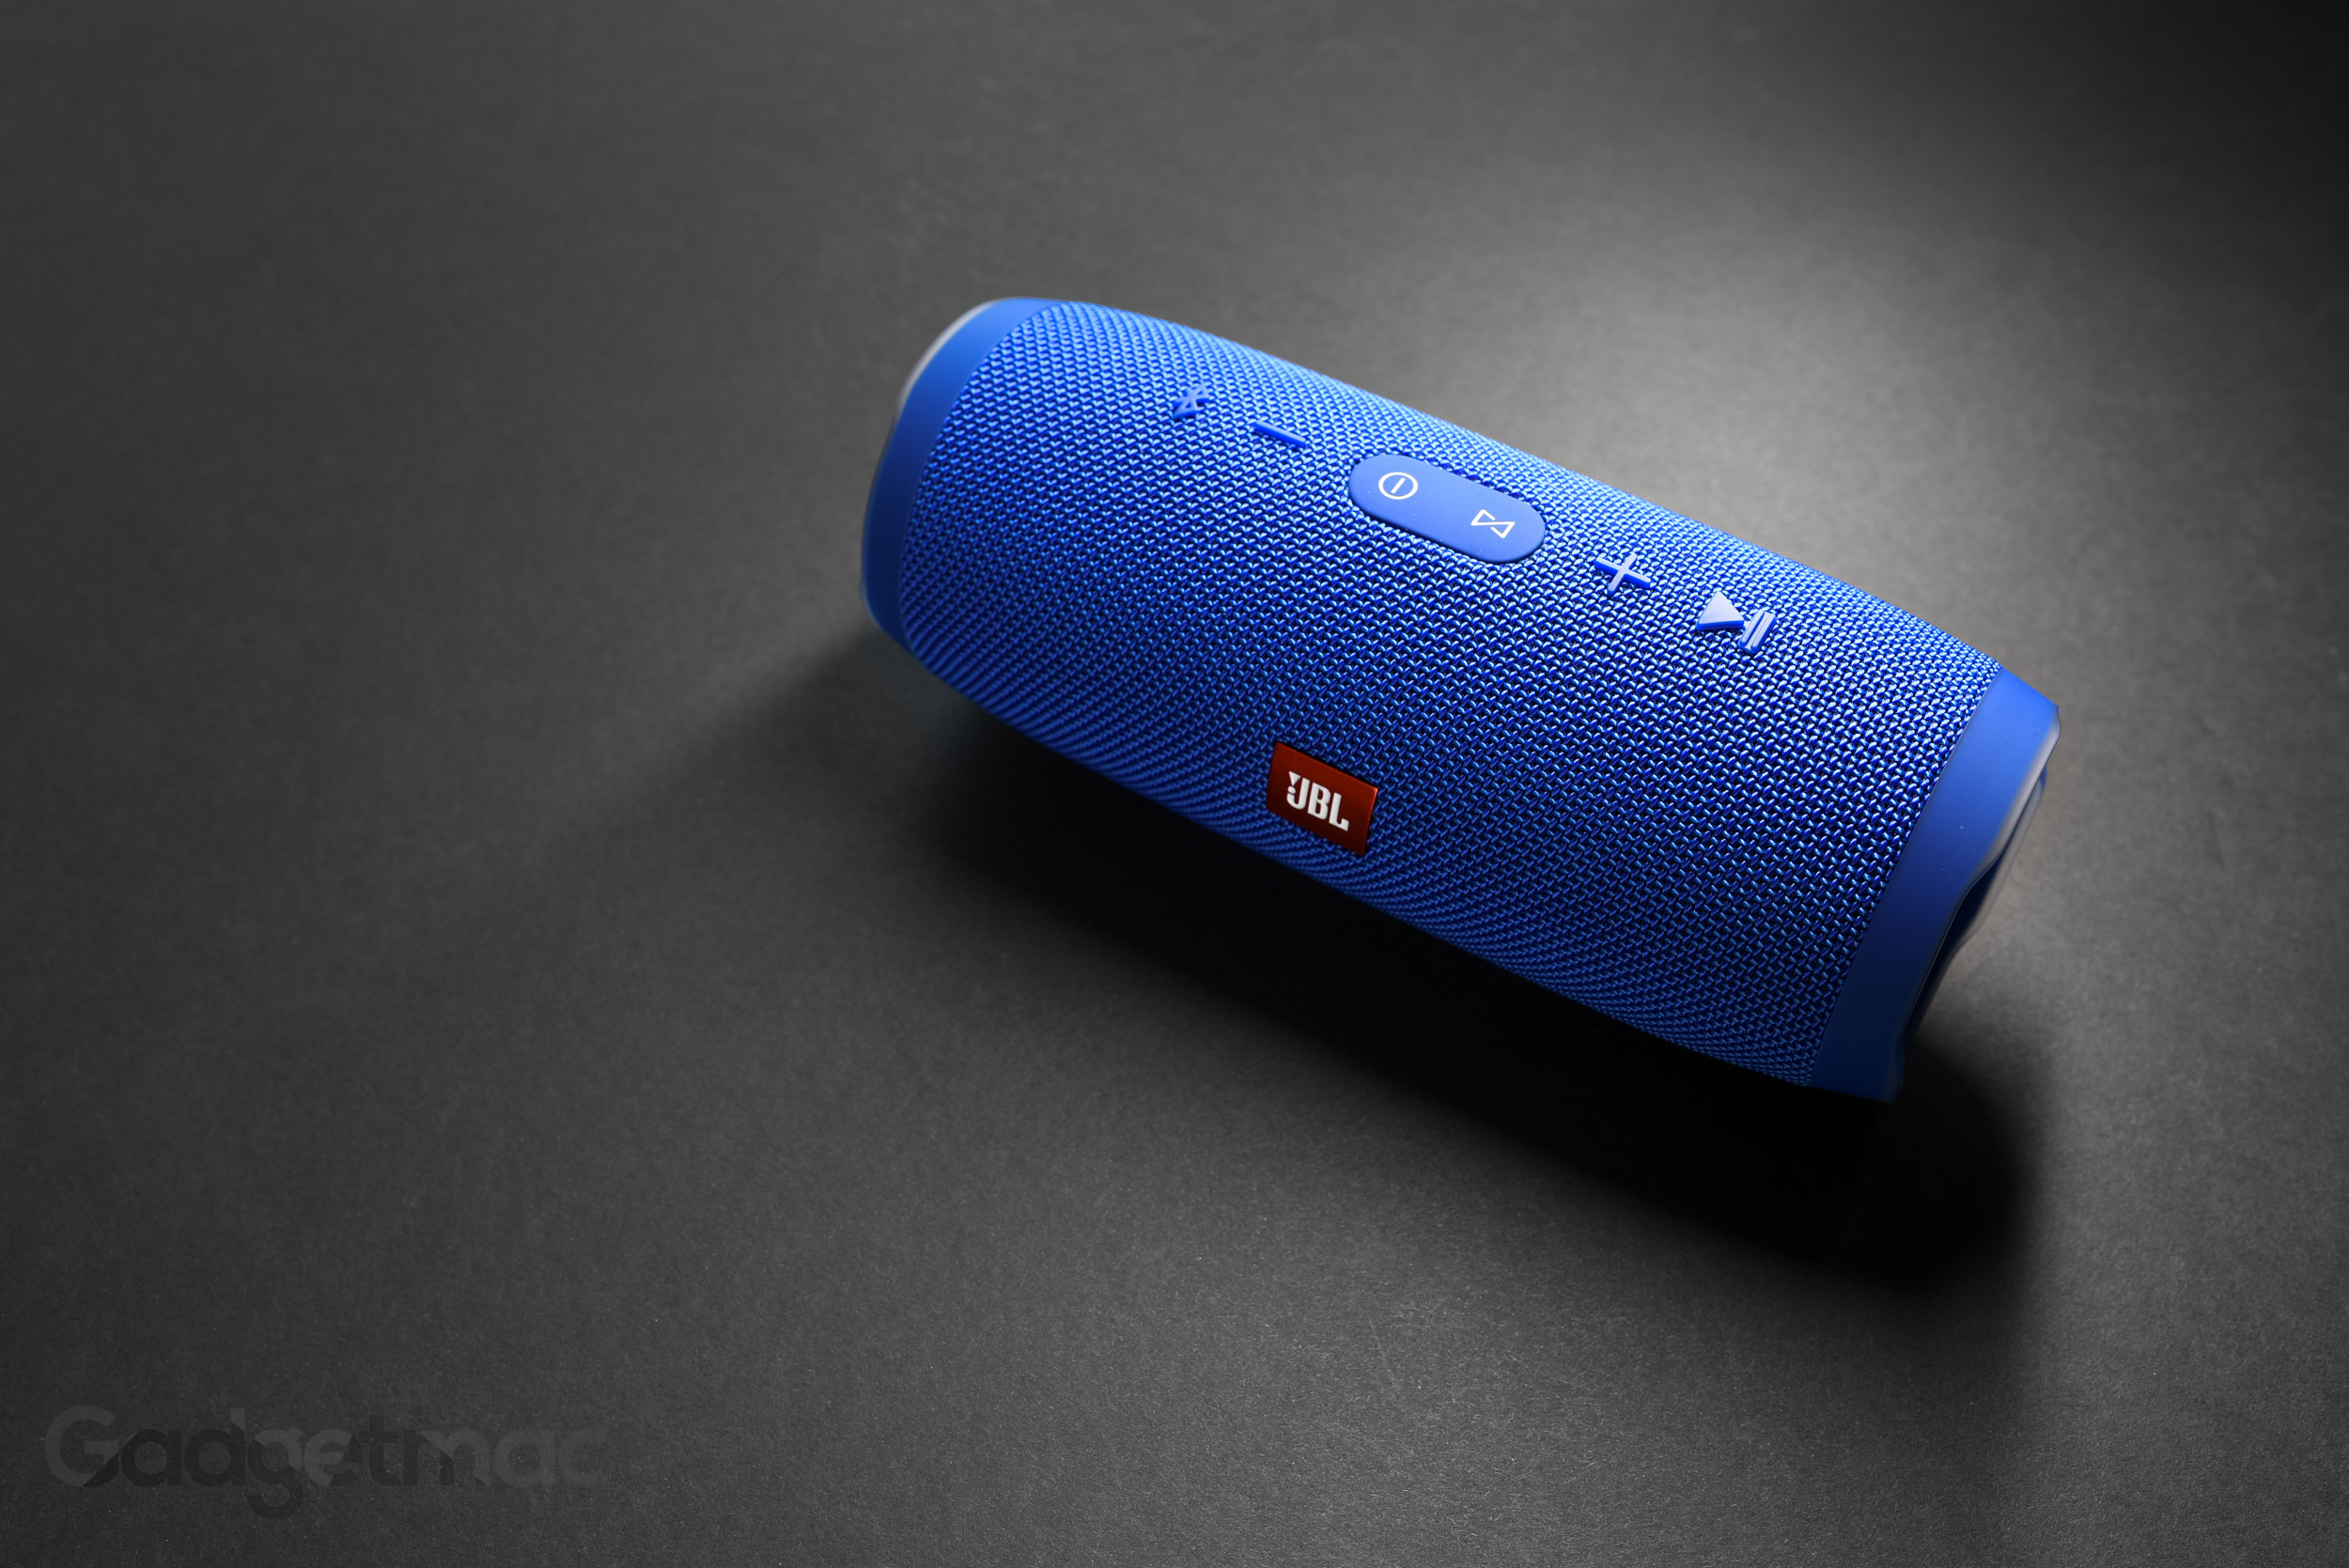 JBL Charge 4 Wireless & Bluetooth Speaker Review - Consumer Reports